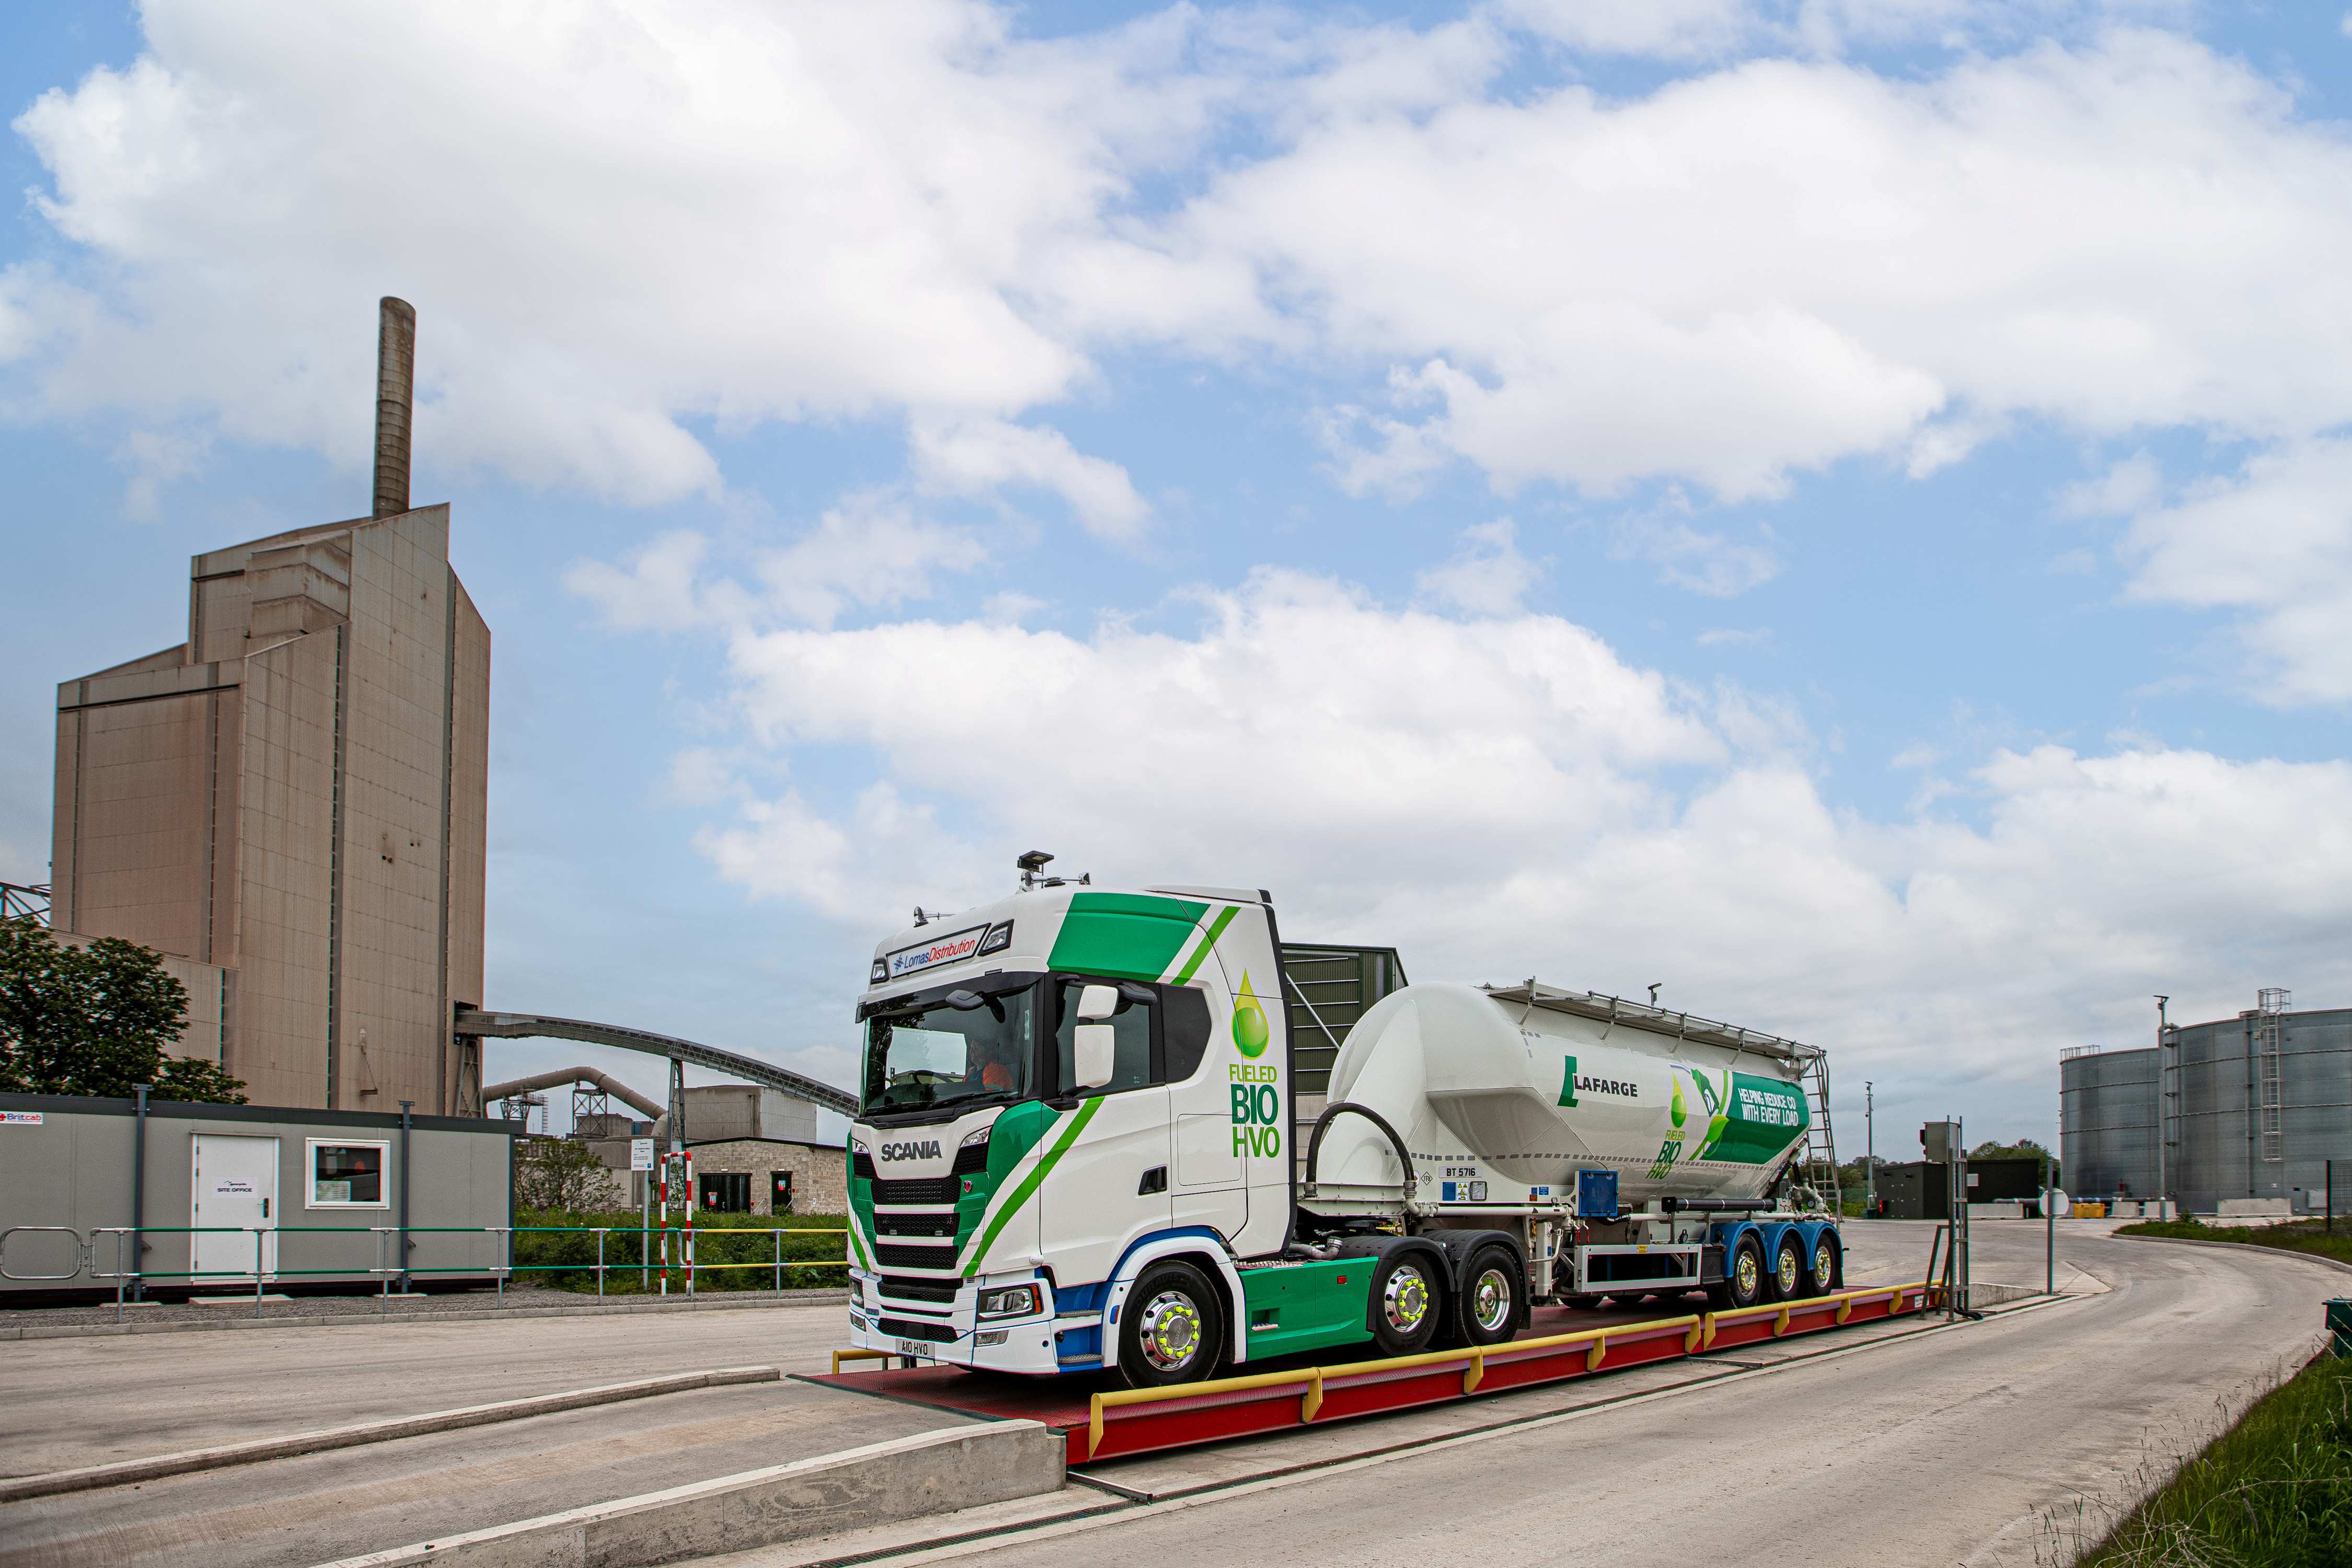 The 30-tonne bulk tanker is fuelled by Hydrotreated Vegetable Oil (HVO)